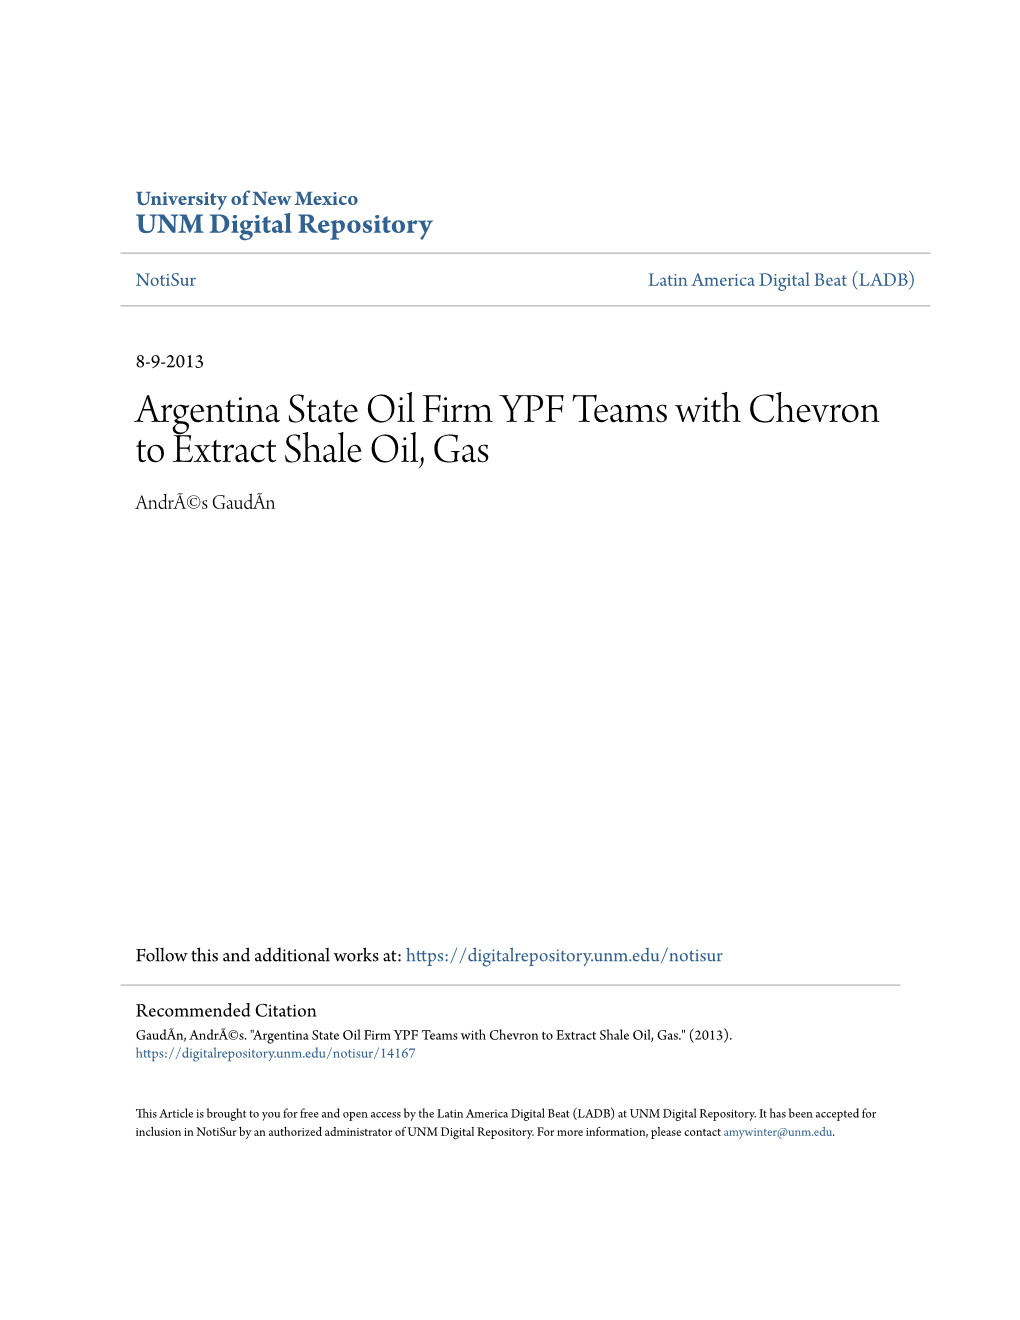 Argentina State Oil Firm YPF Teams with Chevron to Extract Shale Oil, Gas Andrã©S Gaudãn